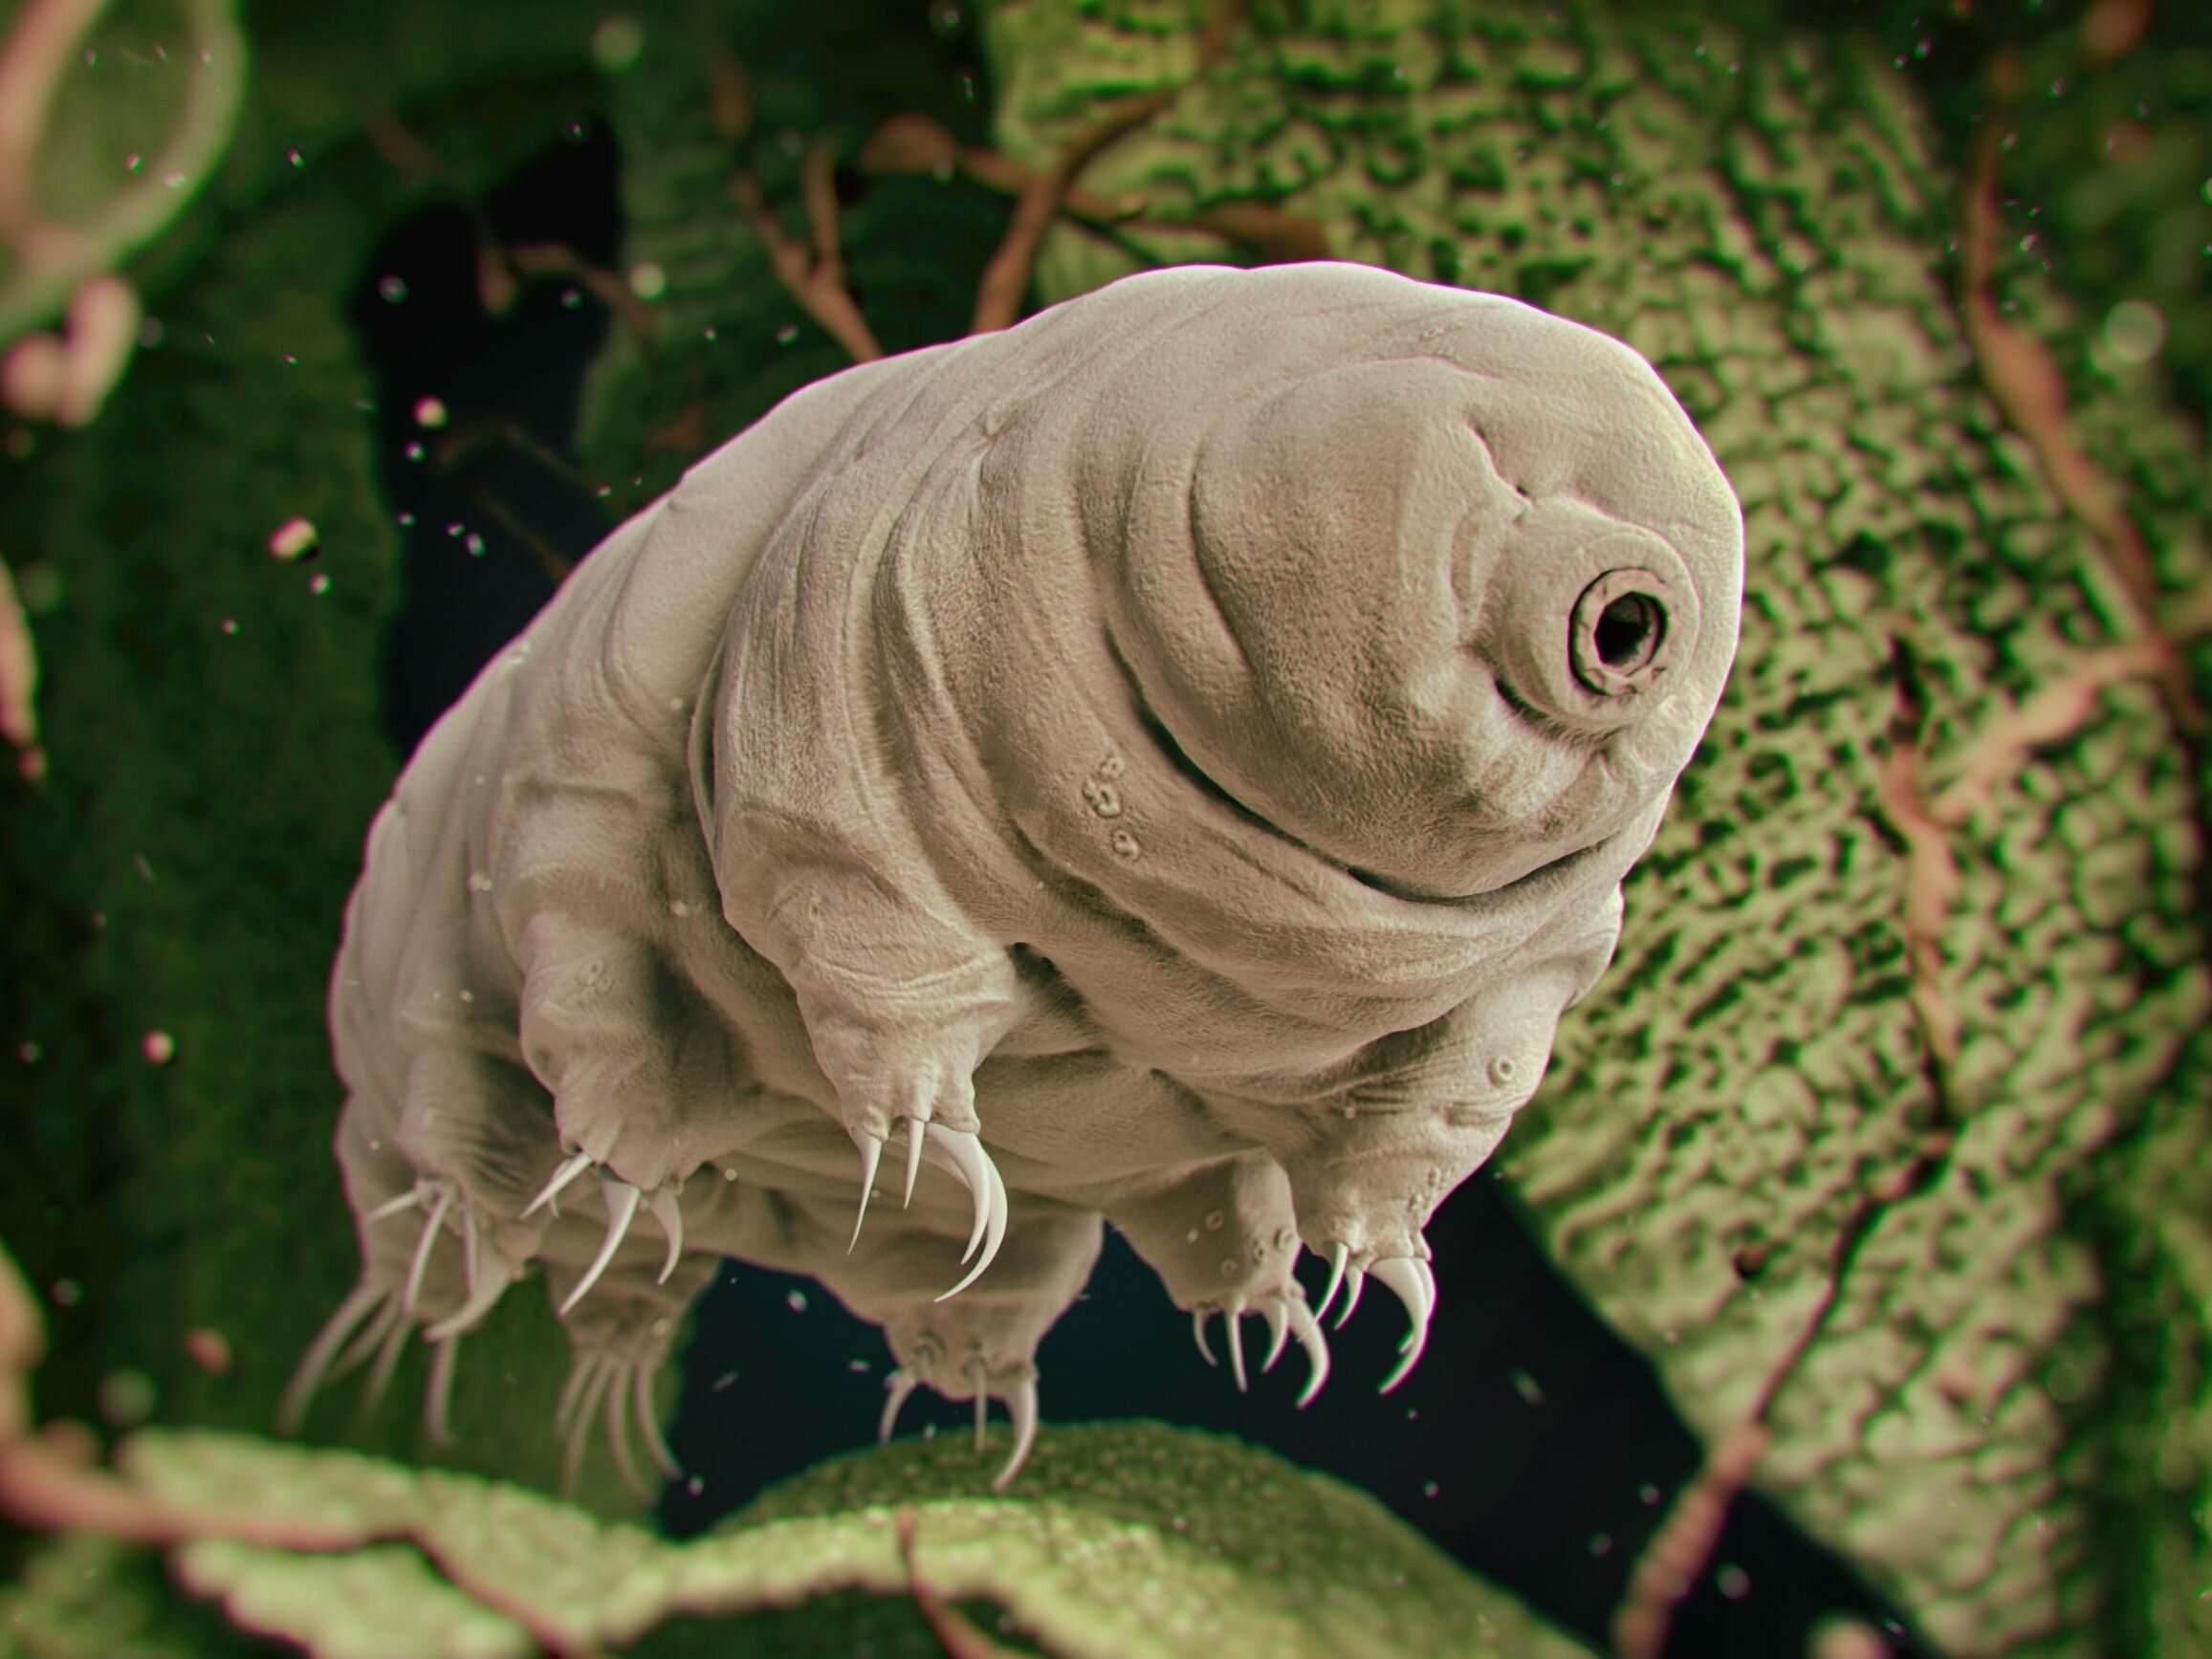 The iconic tardigrades are back.  The Polish woman described their clever behavior